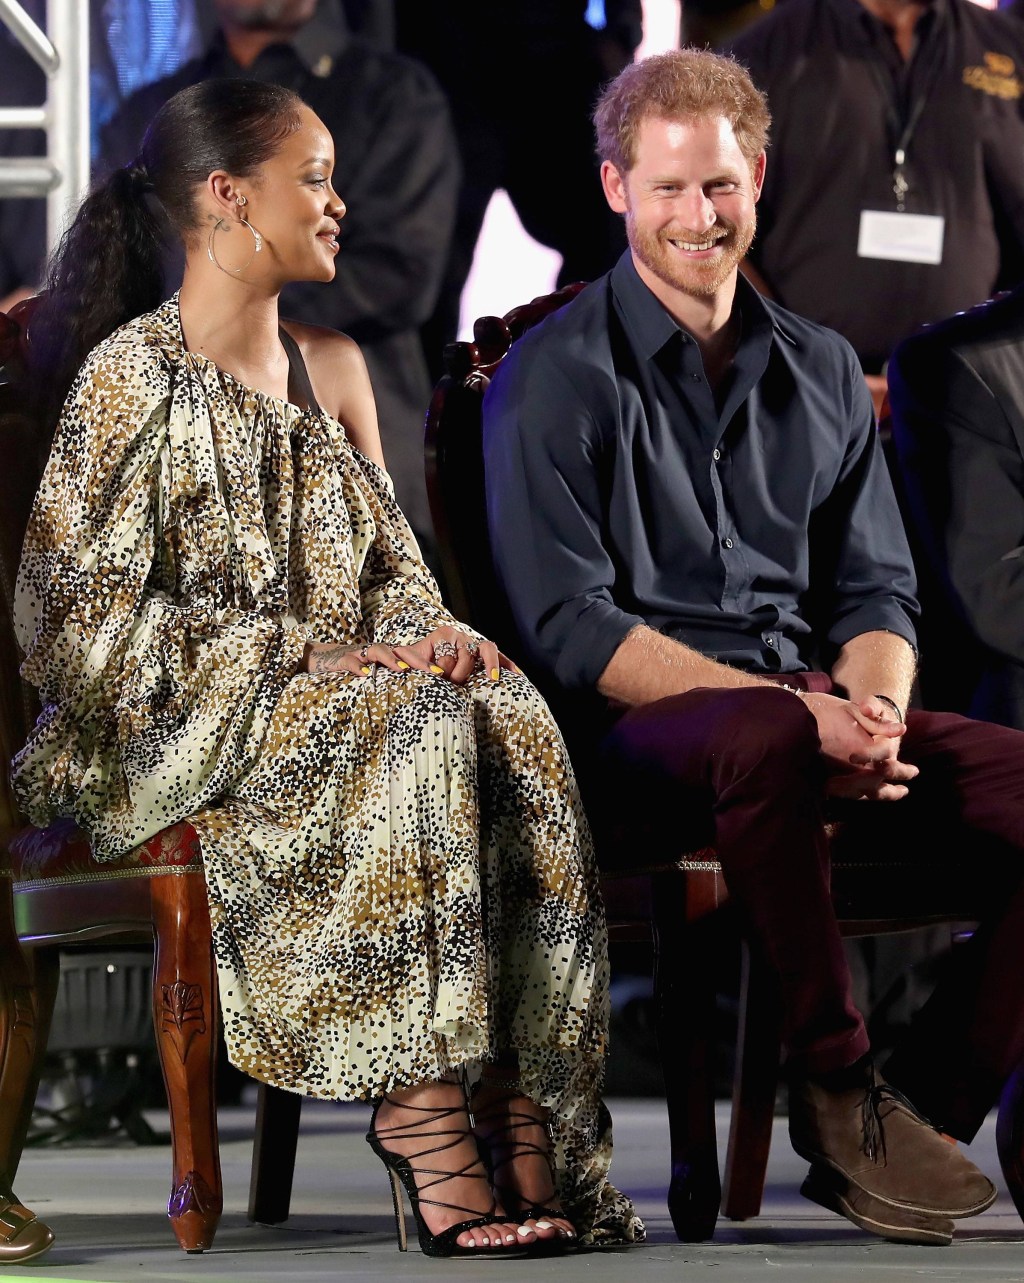 BRIDGETOWN, BARBADOS - NOVEMBER 30:  Prince Harry and singer Rihanna attend a Golden Anniversary Spectacular Mega Concert at the Kensington Oval Cricket Ground on day 10 of an official visit to the Caribbean on November 30, 2016 in  Bridgetown, Barbados. Prince Harry's visit to The Caribbean marks the 35th Anniversary of Independence in Antigua and Barbuda and the 50th Anniversary of Independence in Barbados and Guyana.  (Photo by Chris Jackson/Getty Images)